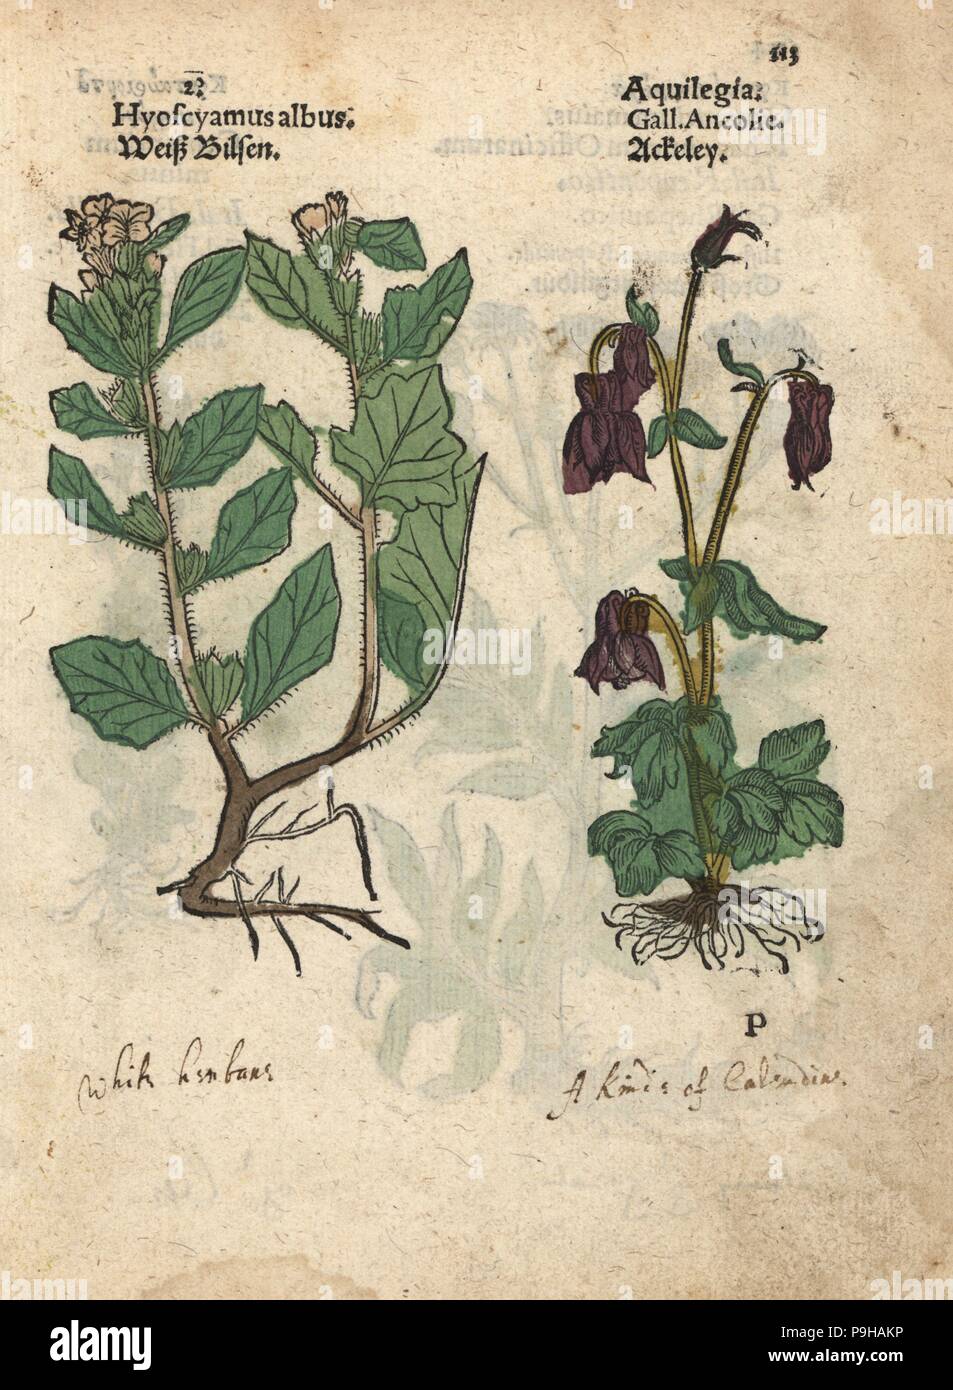 White henbane, Hyoscyamus albus, and columbine, Aquilegia vulgaris. Handcoloured woodblock engraving of a botanical illustration from Adam Lonicer's Krauterbuch, or Herbal, Frankfurt, 1557. This from a 17th century pirate edition or atlas of illustrations only, with captions in Latin, Greek, French, Italian, German, and in English manuscript. Stock Photo